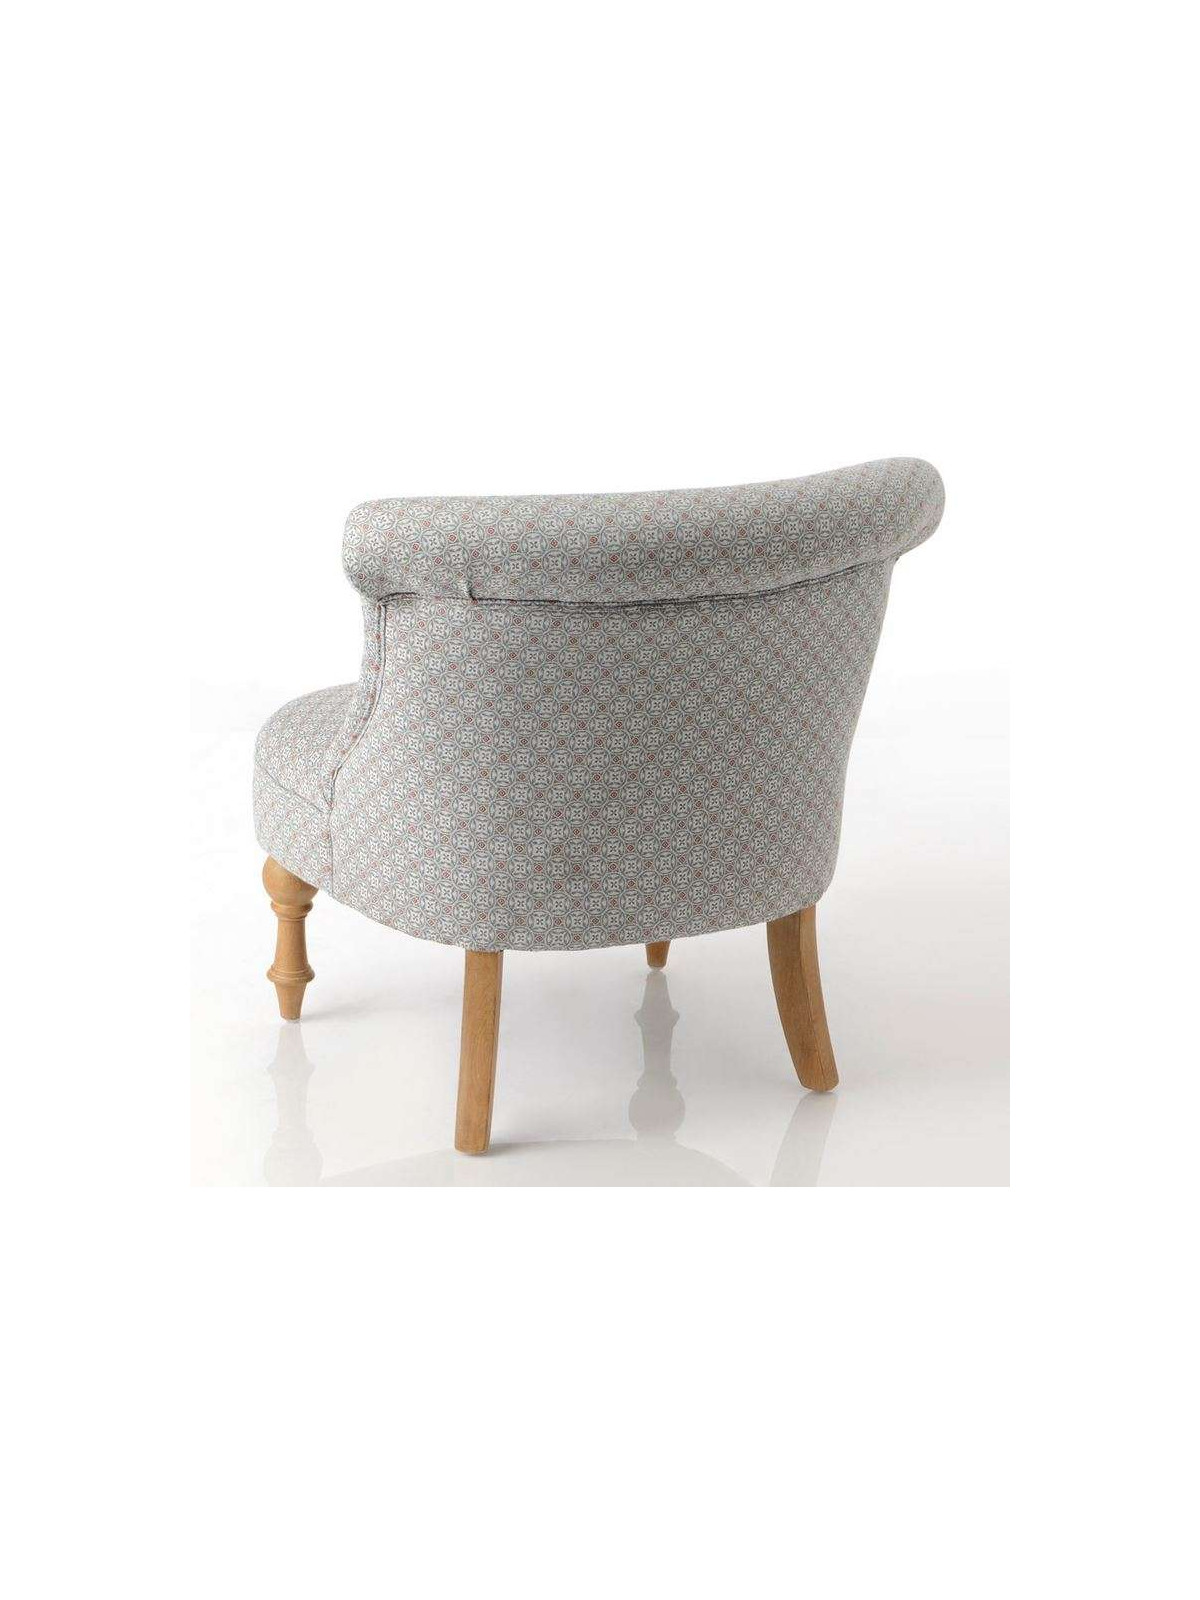 Fauteuil crapaud gris perle